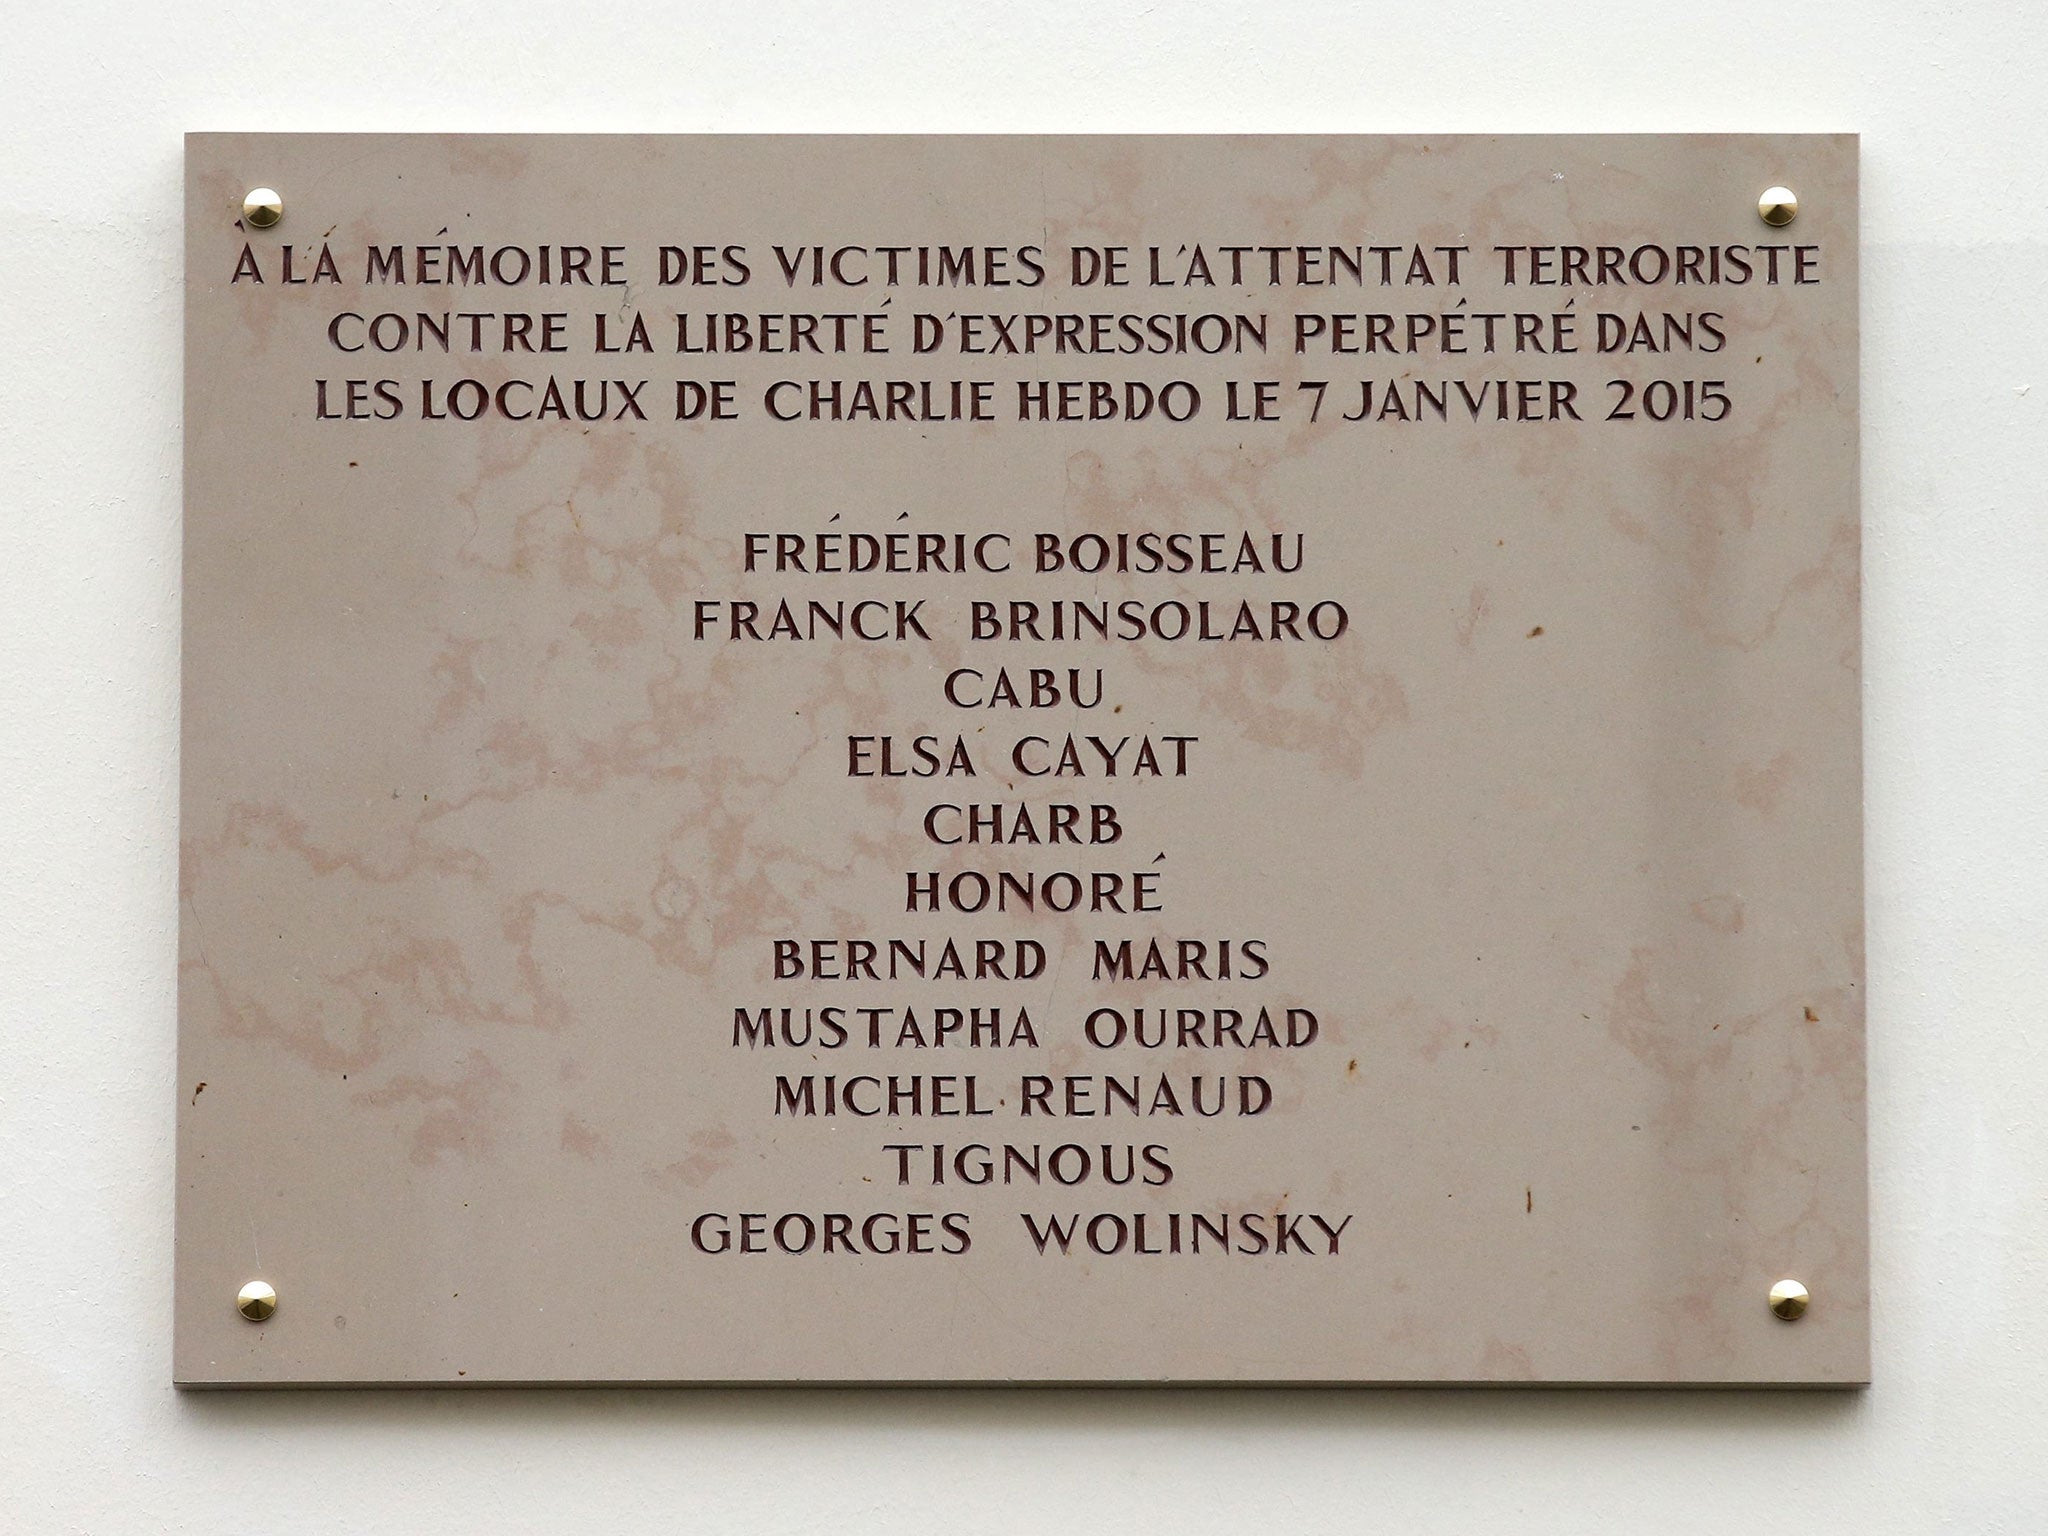 A commemorative plaque to pay tribute to the victims of 2015's attacks outside the former offices of French weekly satirical newspaper Charlie Hebdo